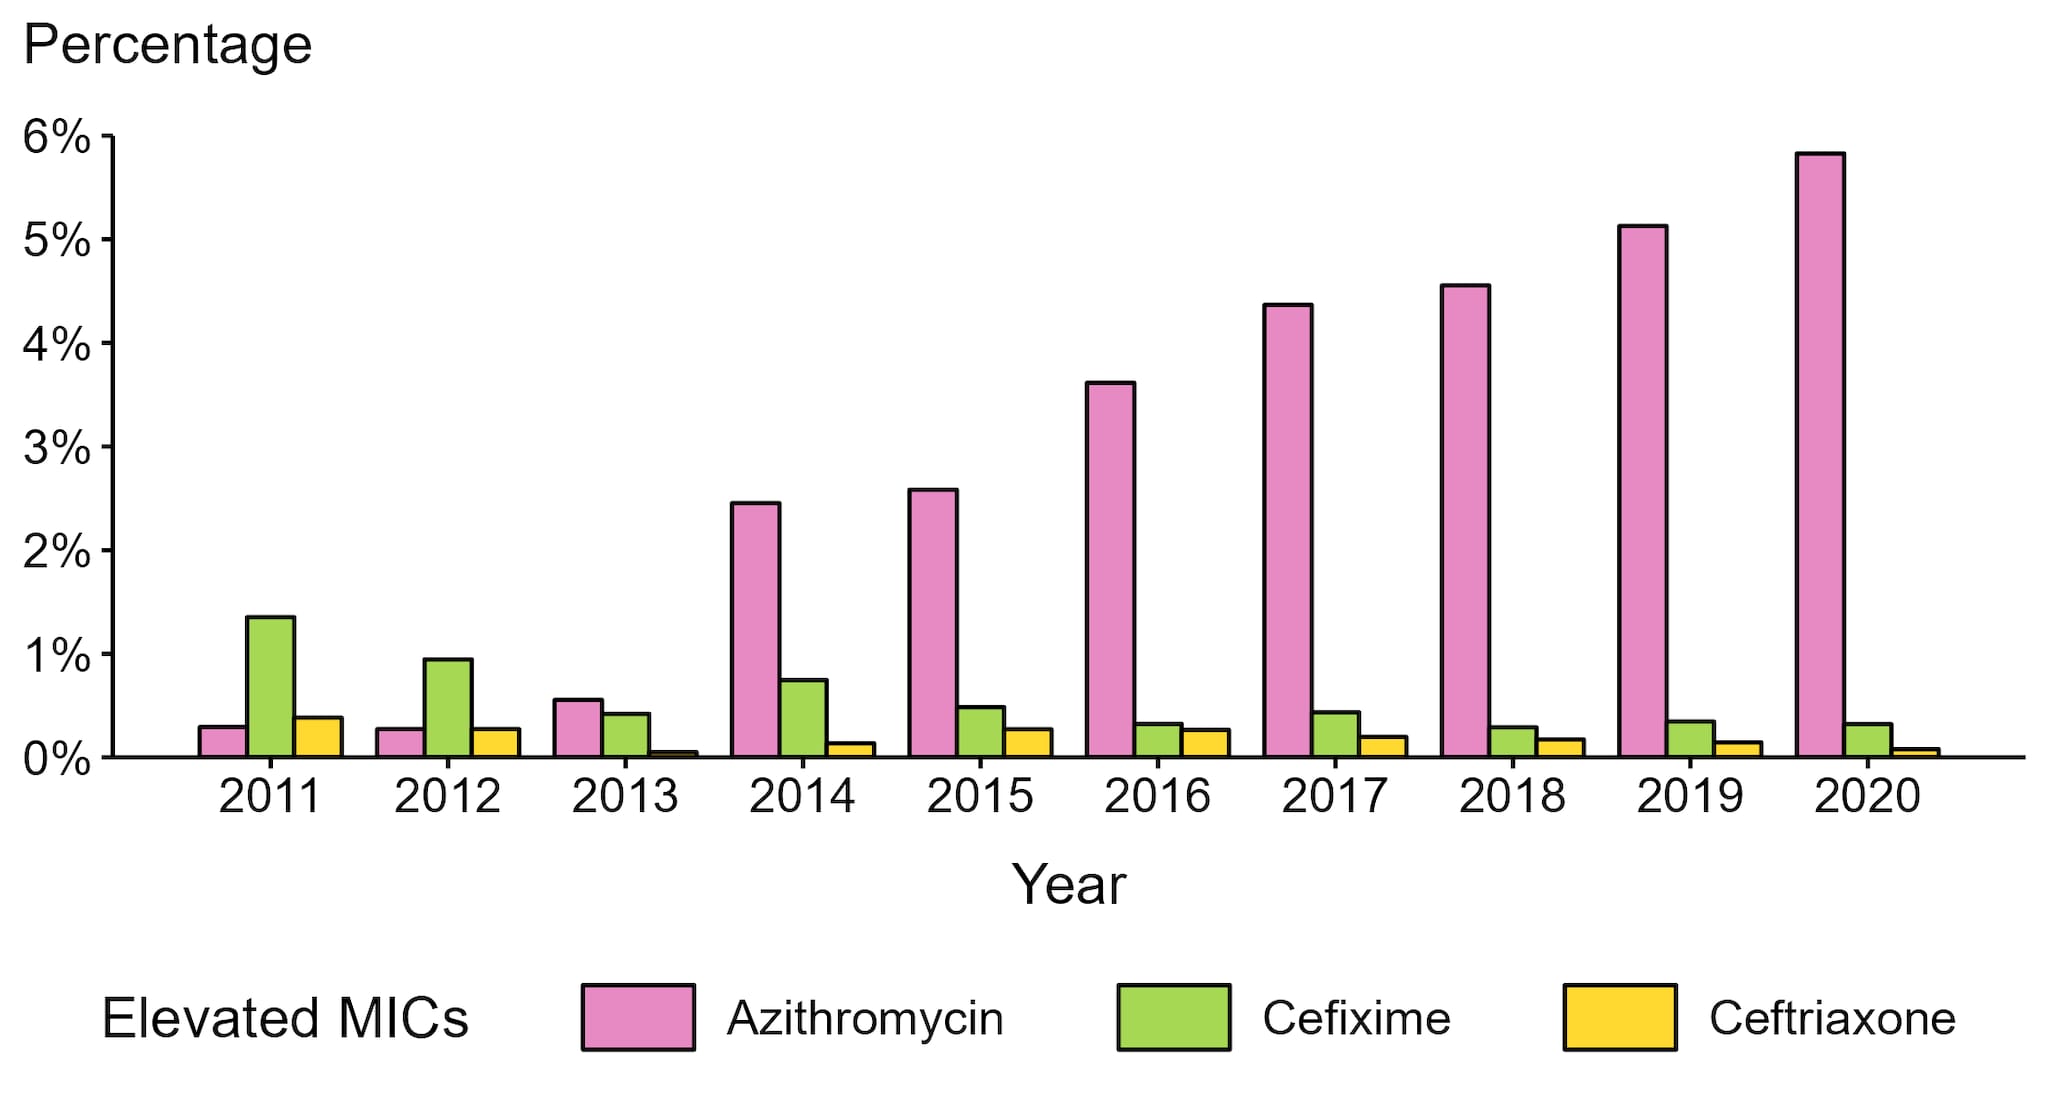 Bar graph showing the percentage of Neisseria gonorrhoeae isolates with elevated minimum inhibitory concentrations to azithromycin, cefixime, and ceftriaxone from 2011 to 2020.